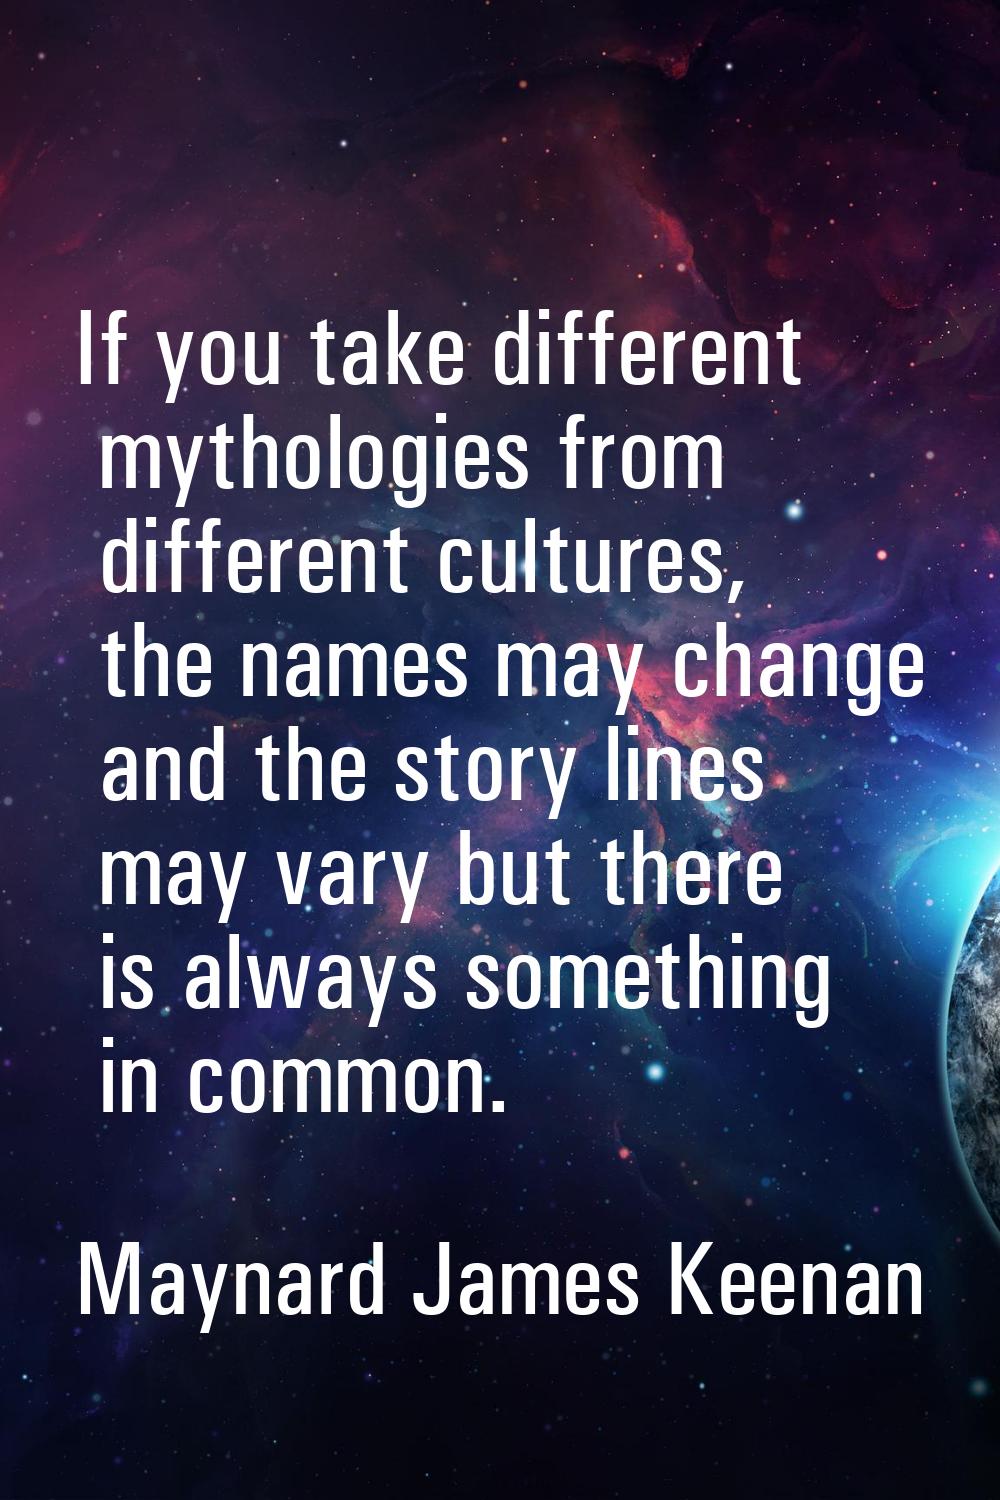 If you take different mythologies from different cultures, the names may change and the story lines